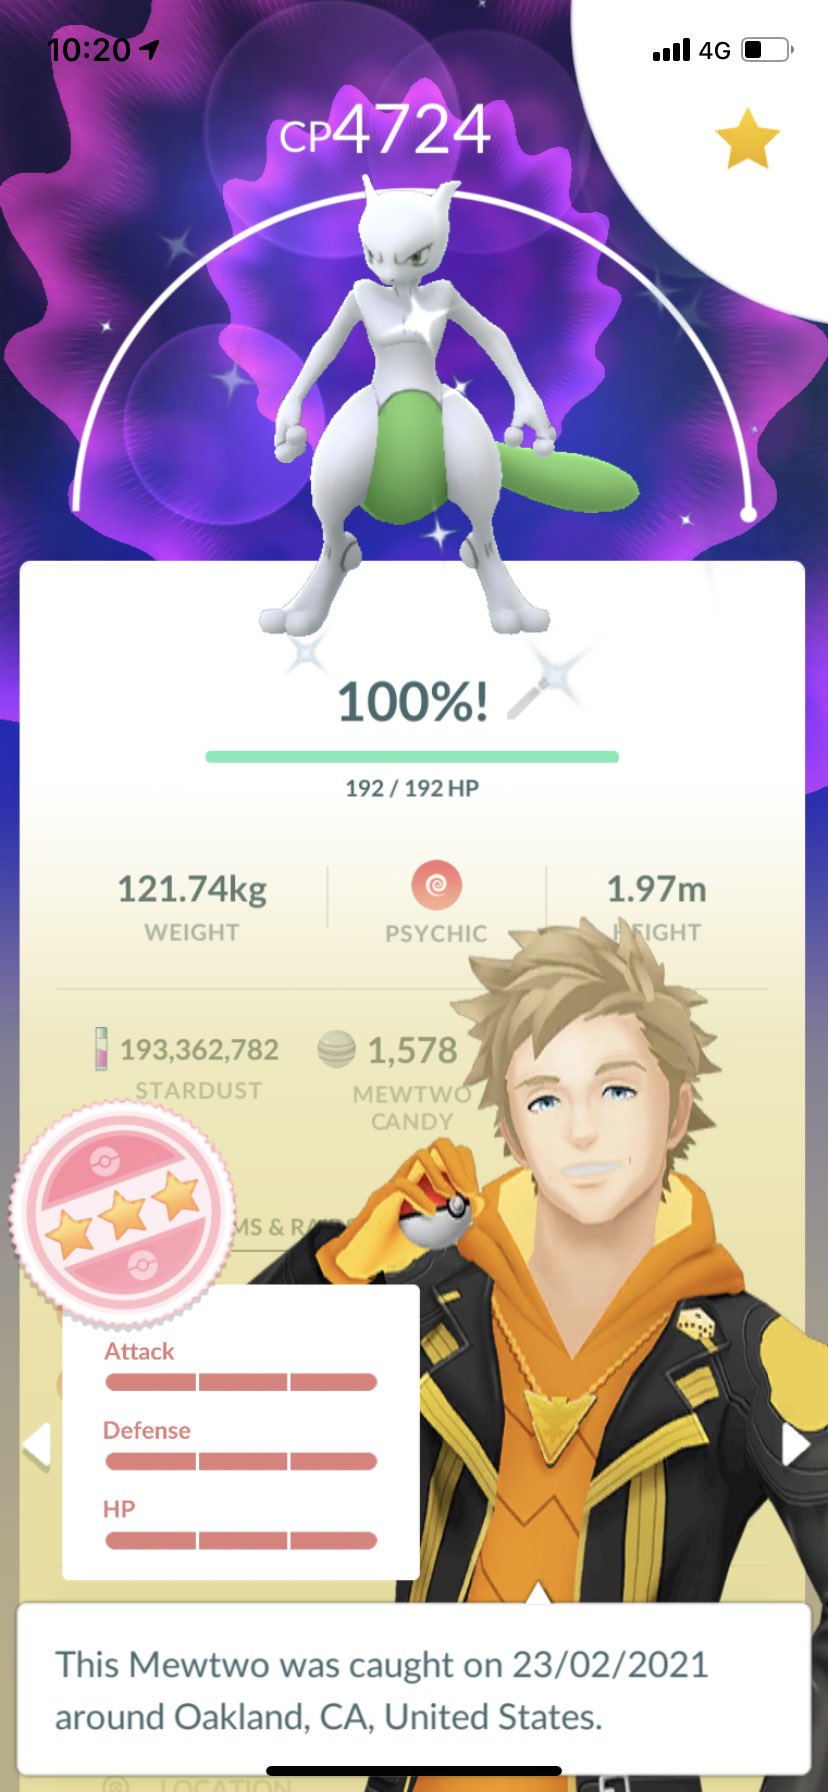 BrandonTan91 on X: Level 50 Mewtwo is ready, will wait for Mega